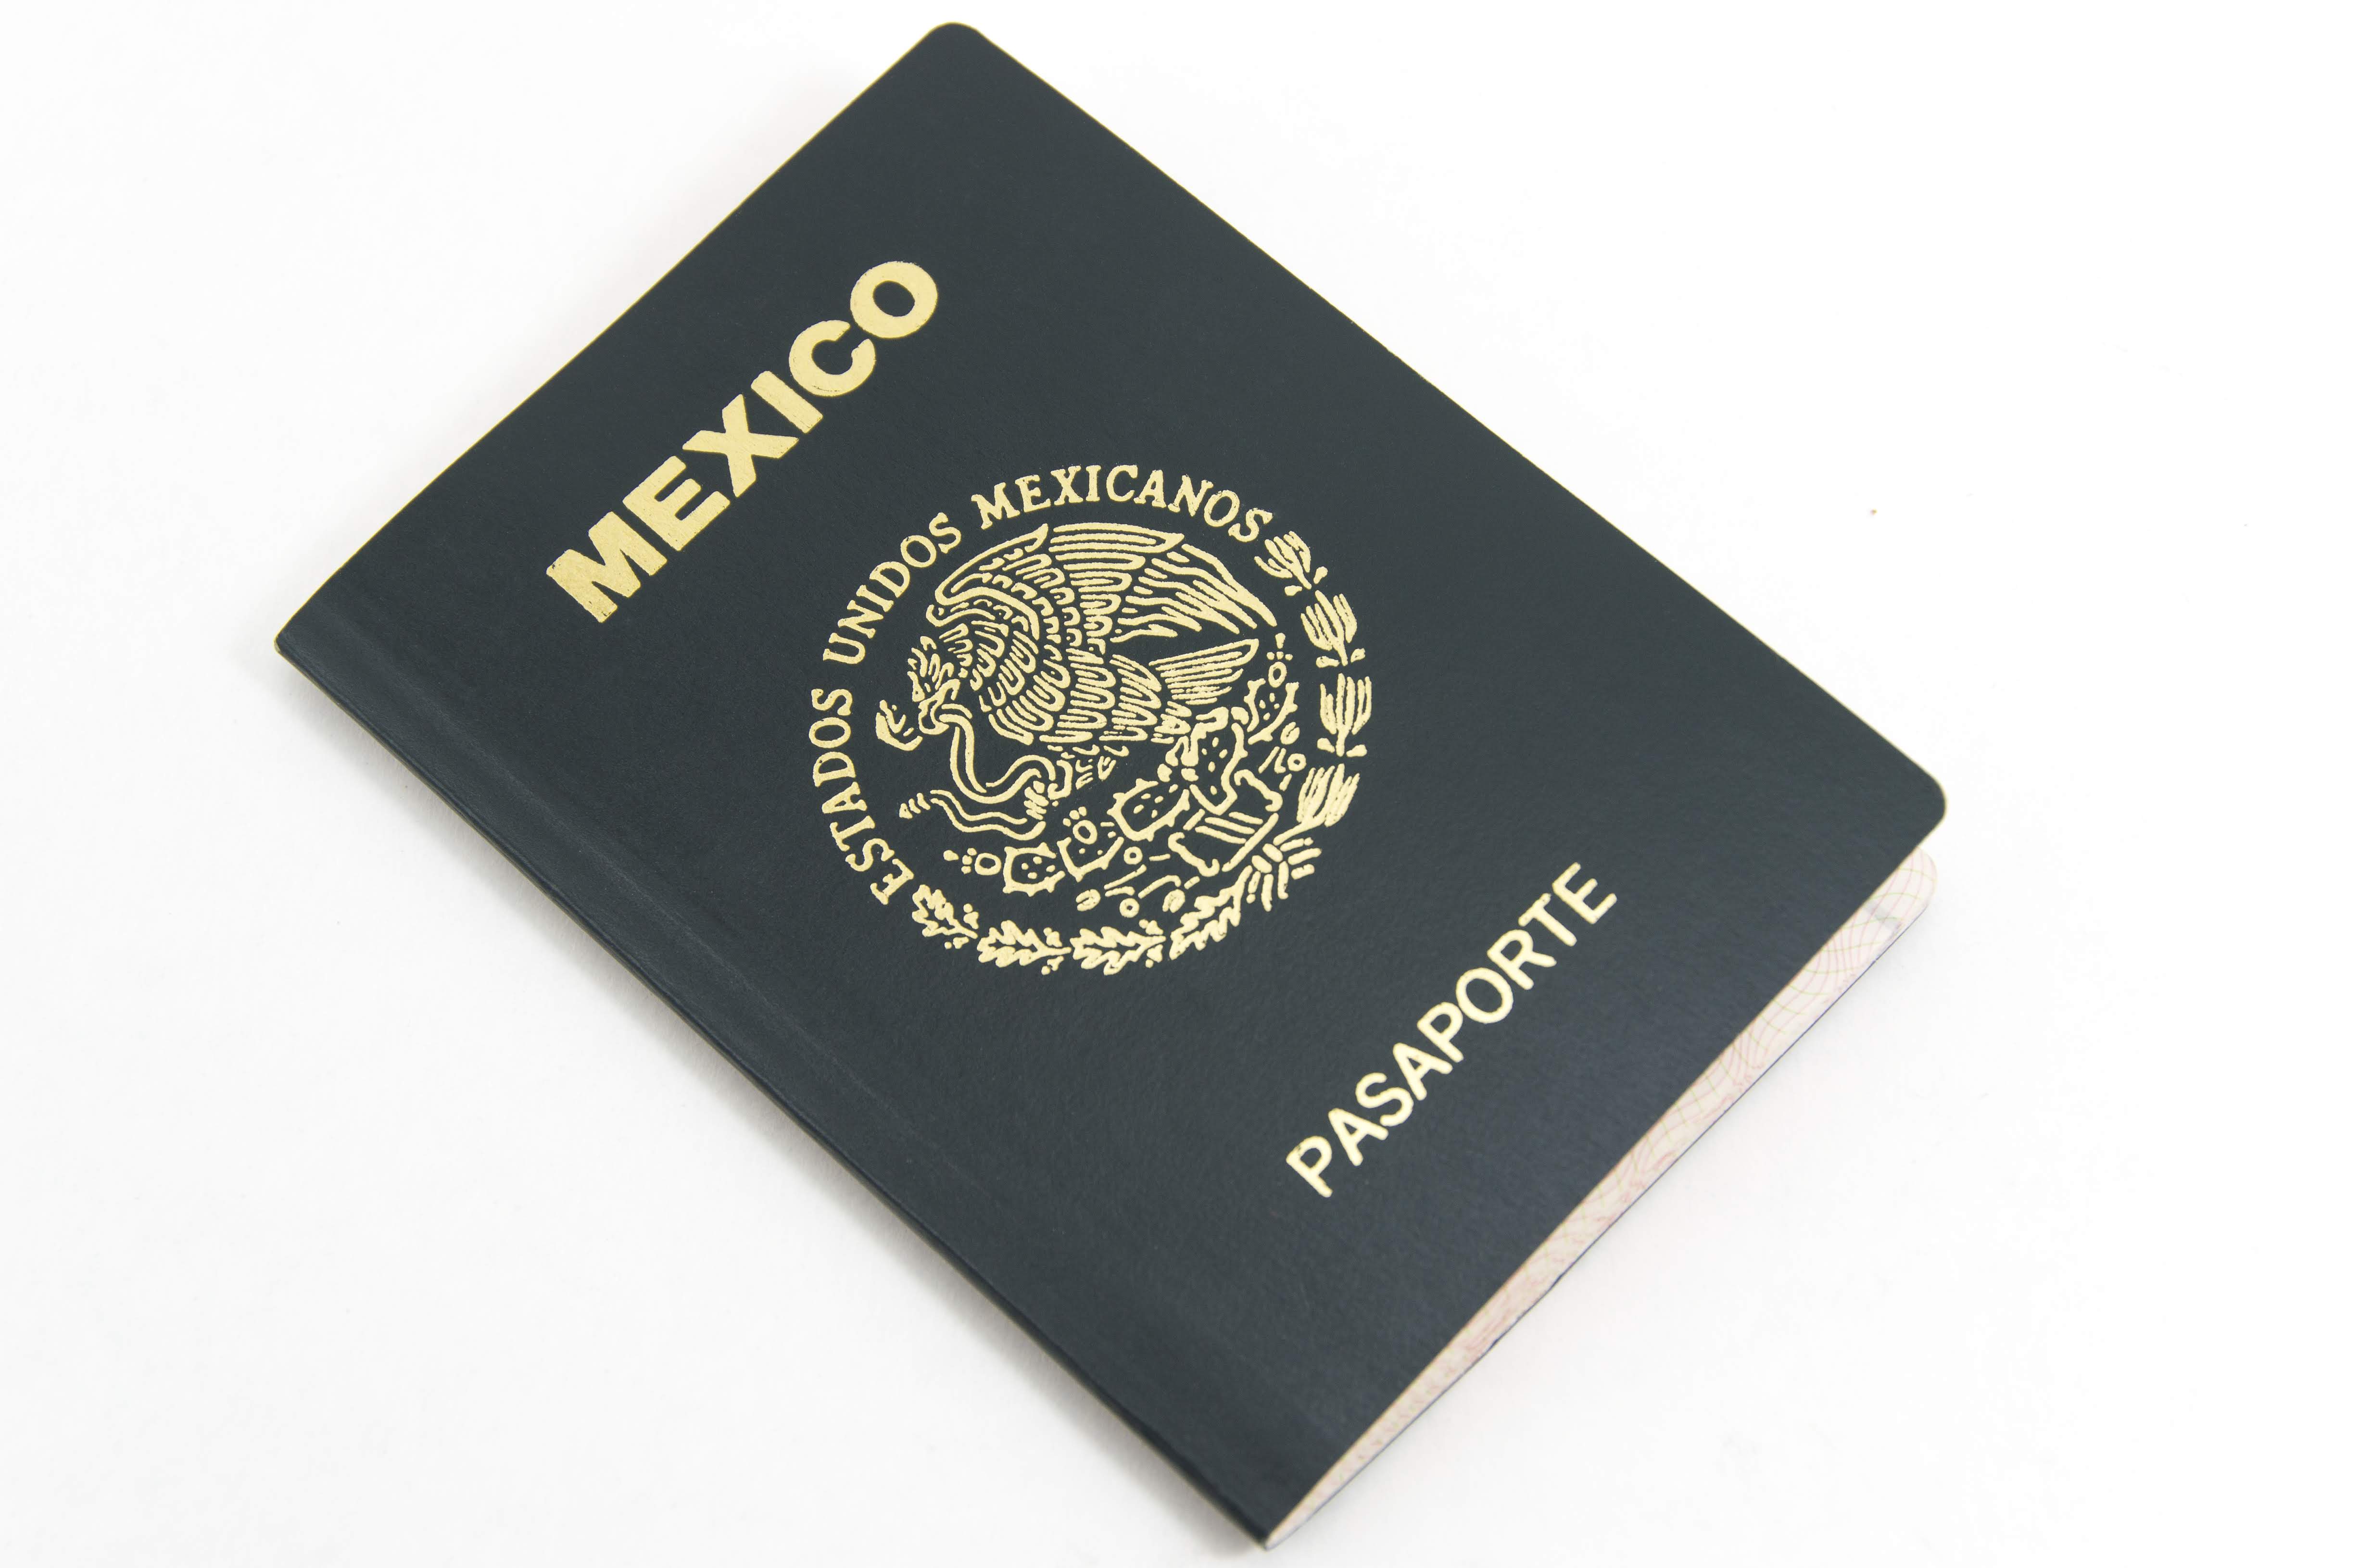 Vietnam Reissue E-visa For Mexican After March 15, 2022 | Vietnam Entry Requirements For Mexican 2022